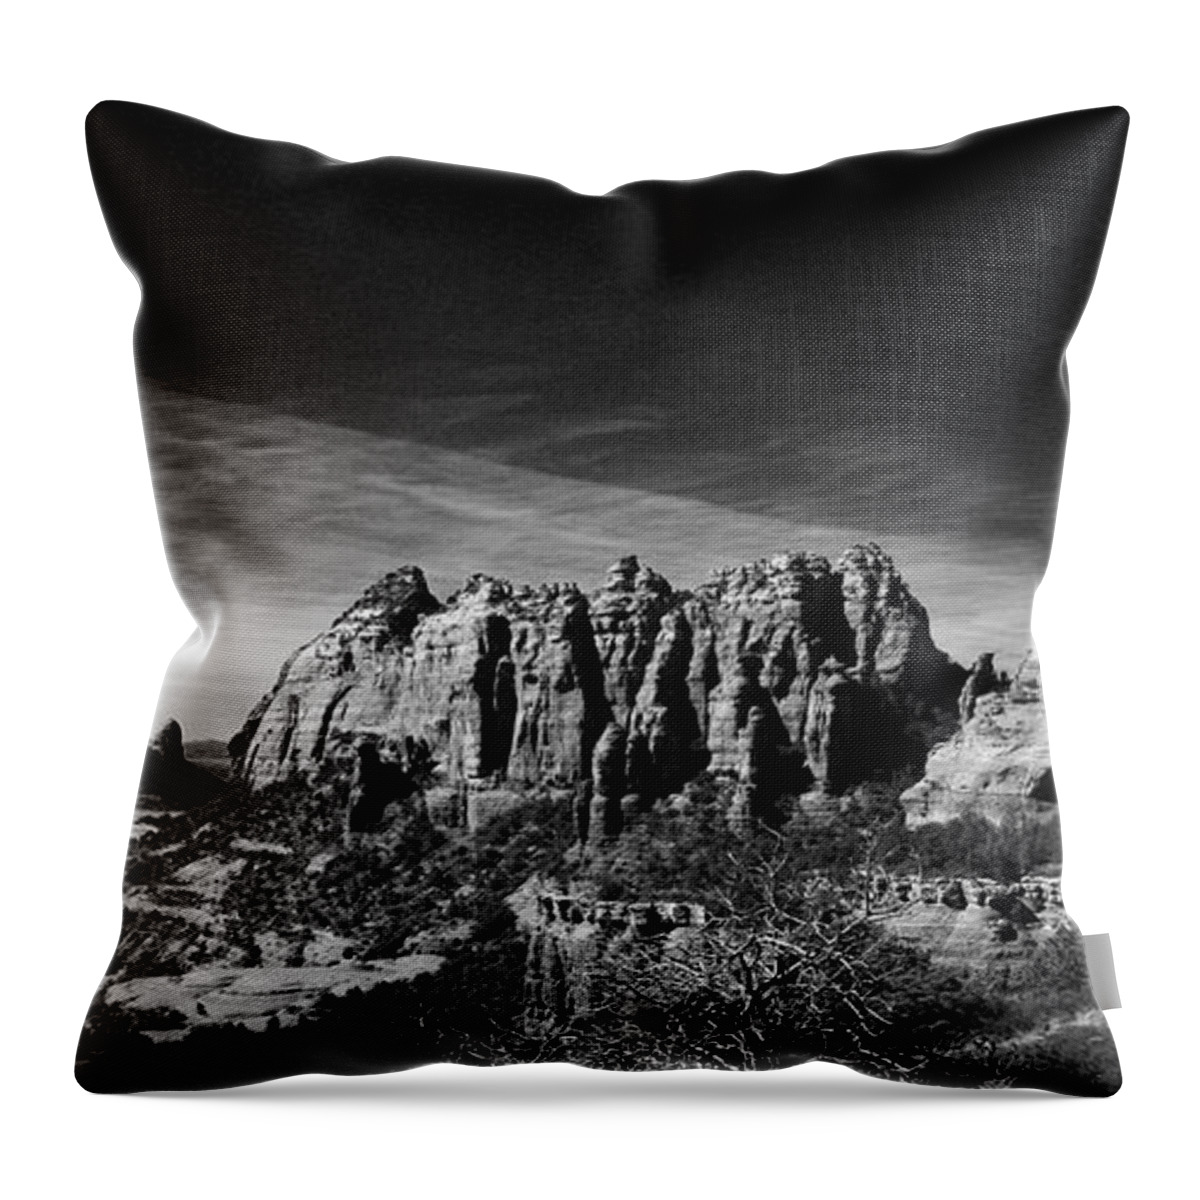 Sedona Throw Pillow featuring the photograph Sedona Reversed by Randy Oberg